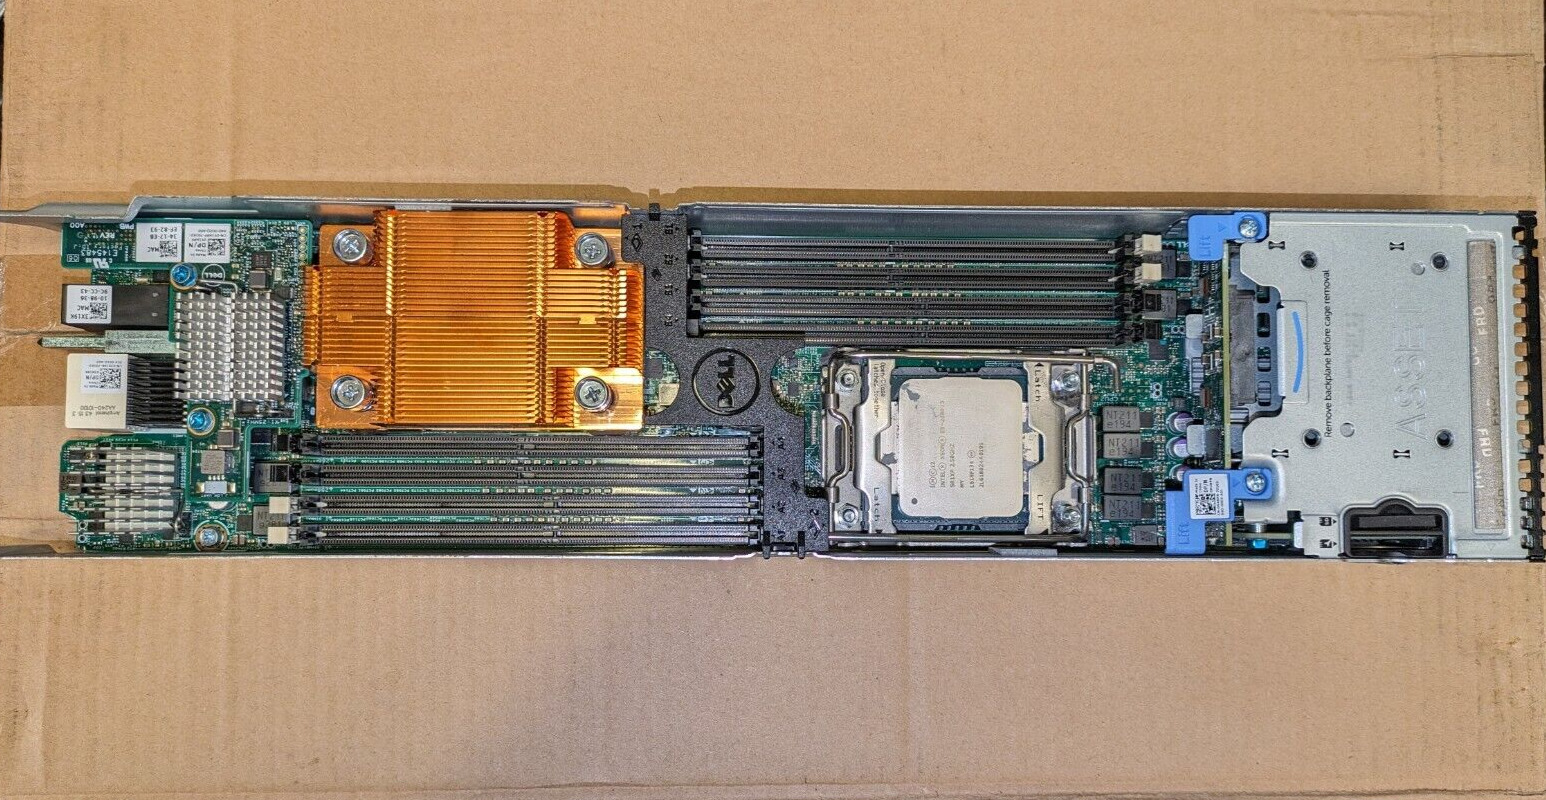 Dell PowerEdge FC430 Blade with 2 x Xeon 2680v3 CPUs